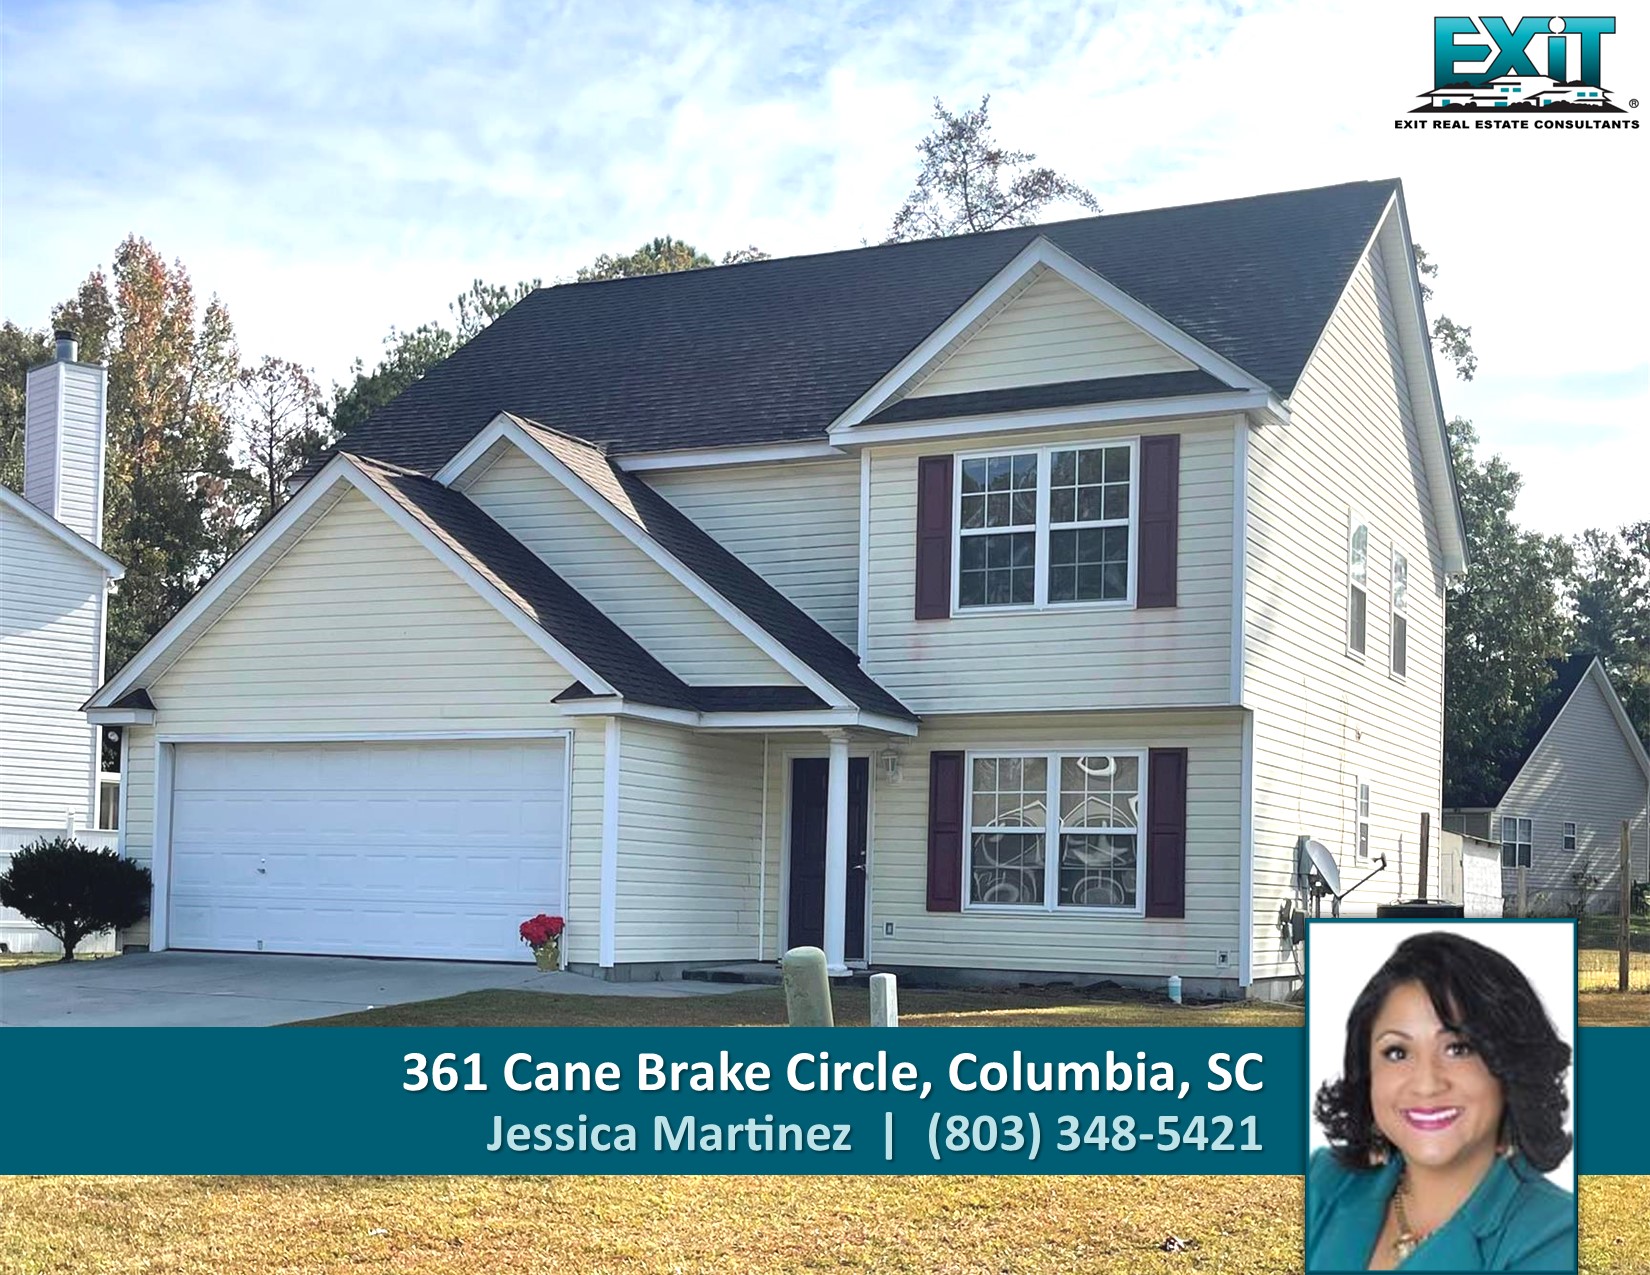 Just listed in Cane Brake